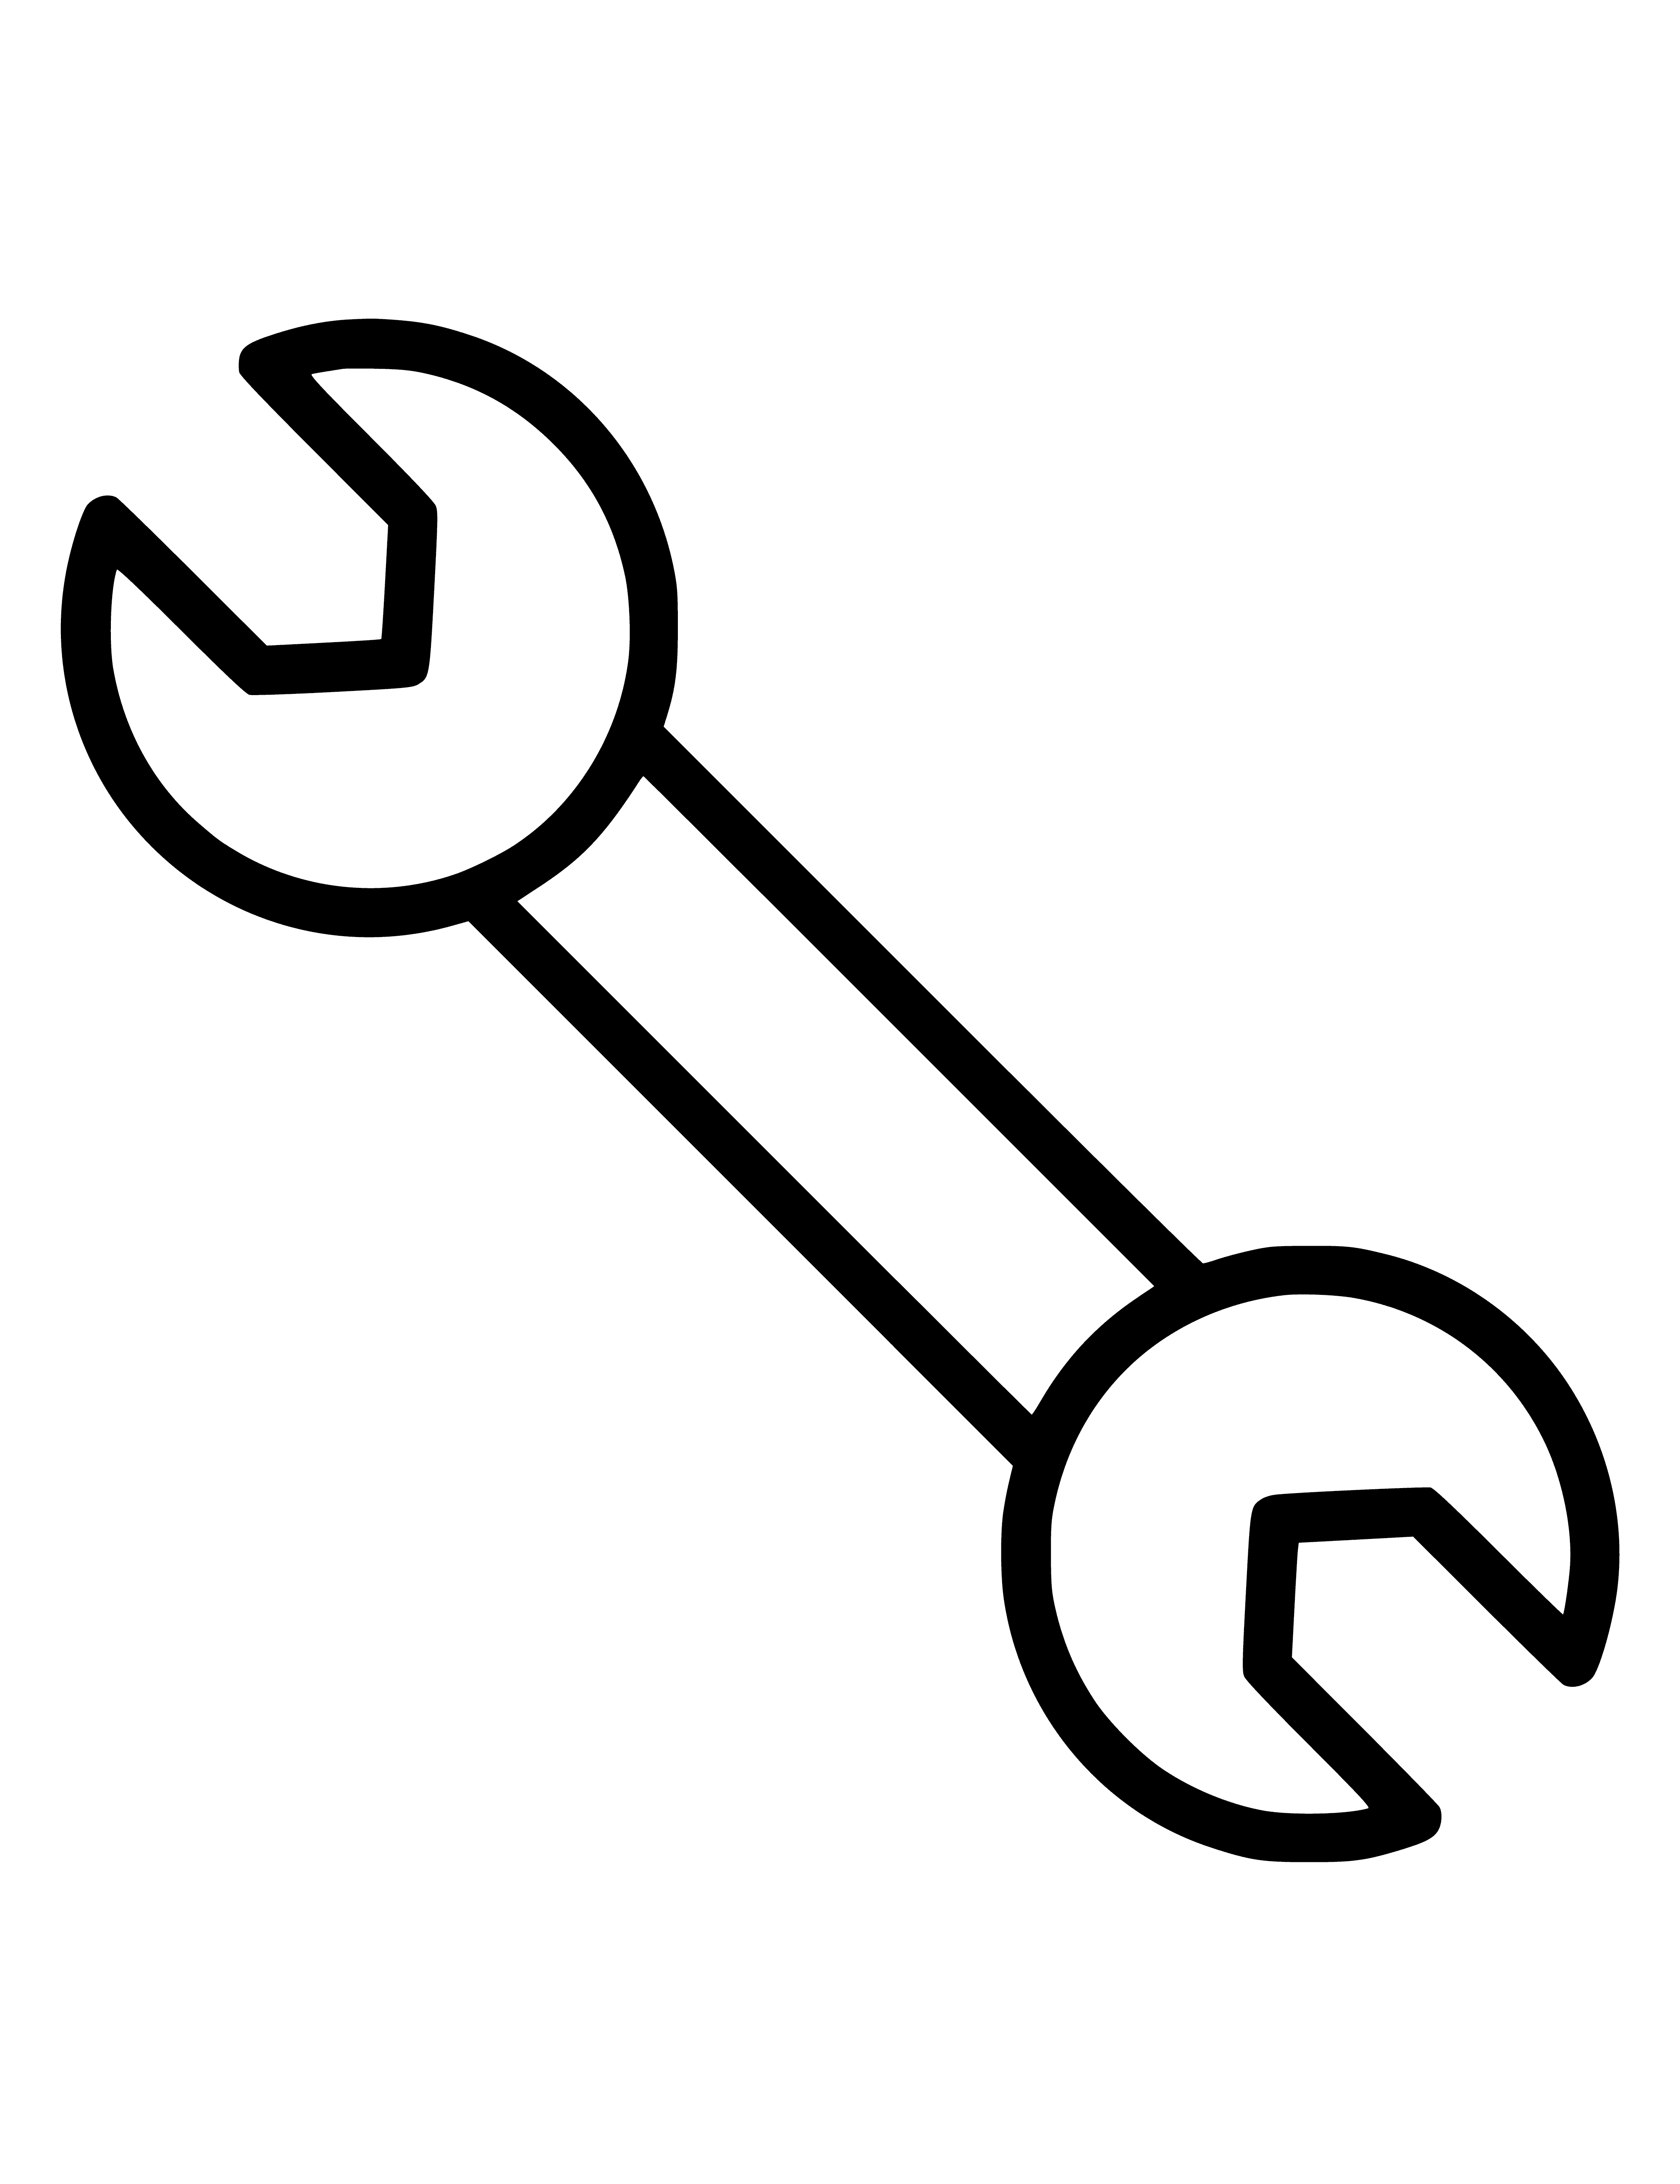 coloring page: Wrenches of various sizes in coloring page, include a long handle with open & toothed end, & shorter wide head open at one end.